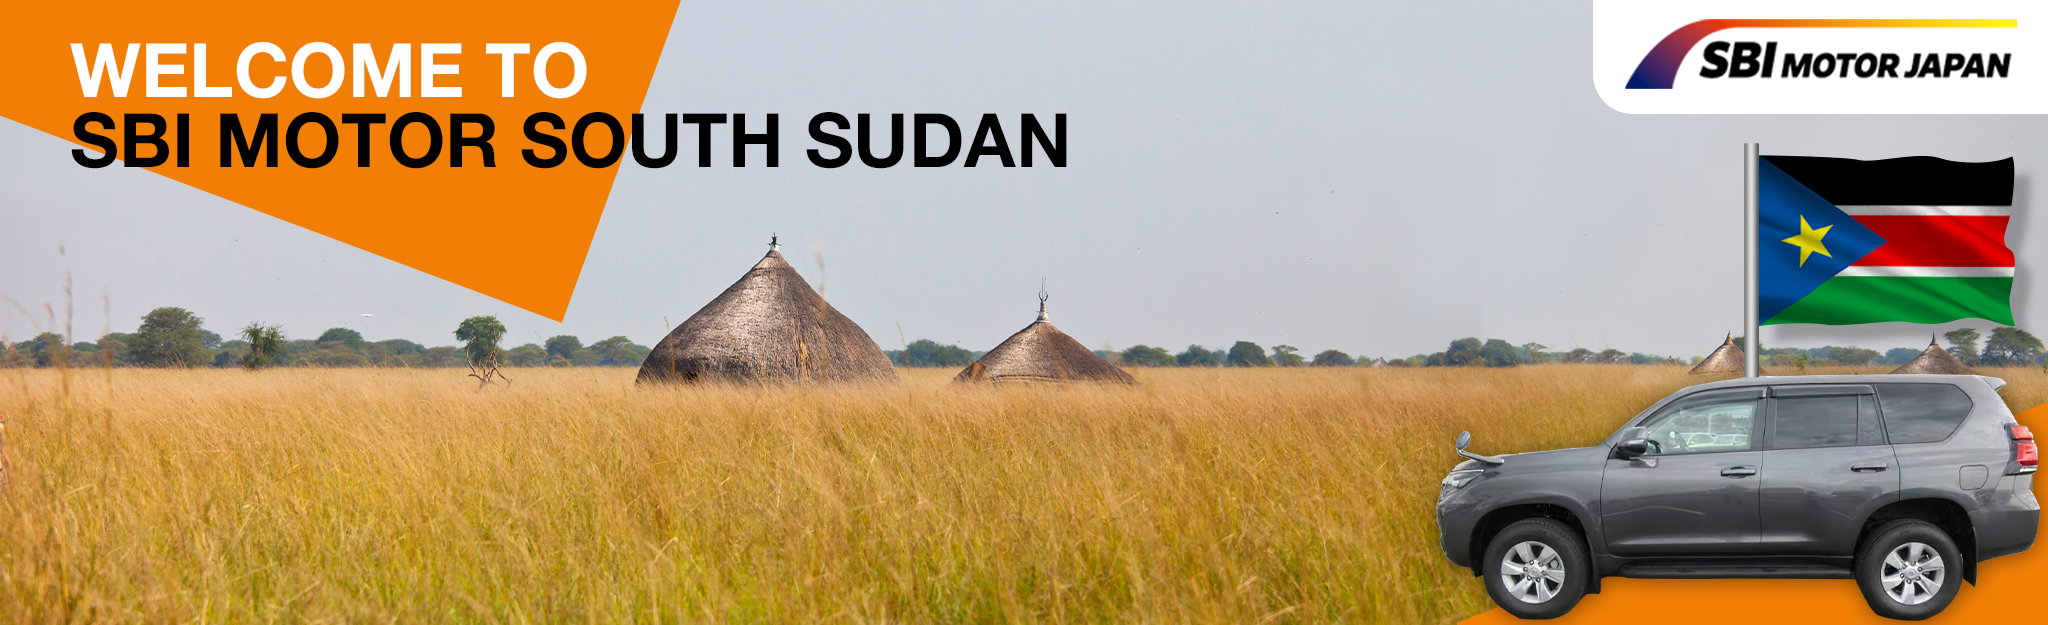 Welcome to SBI South Sudan. You can get local support in South Sudan! We offer sophisticated Japanese used cars.